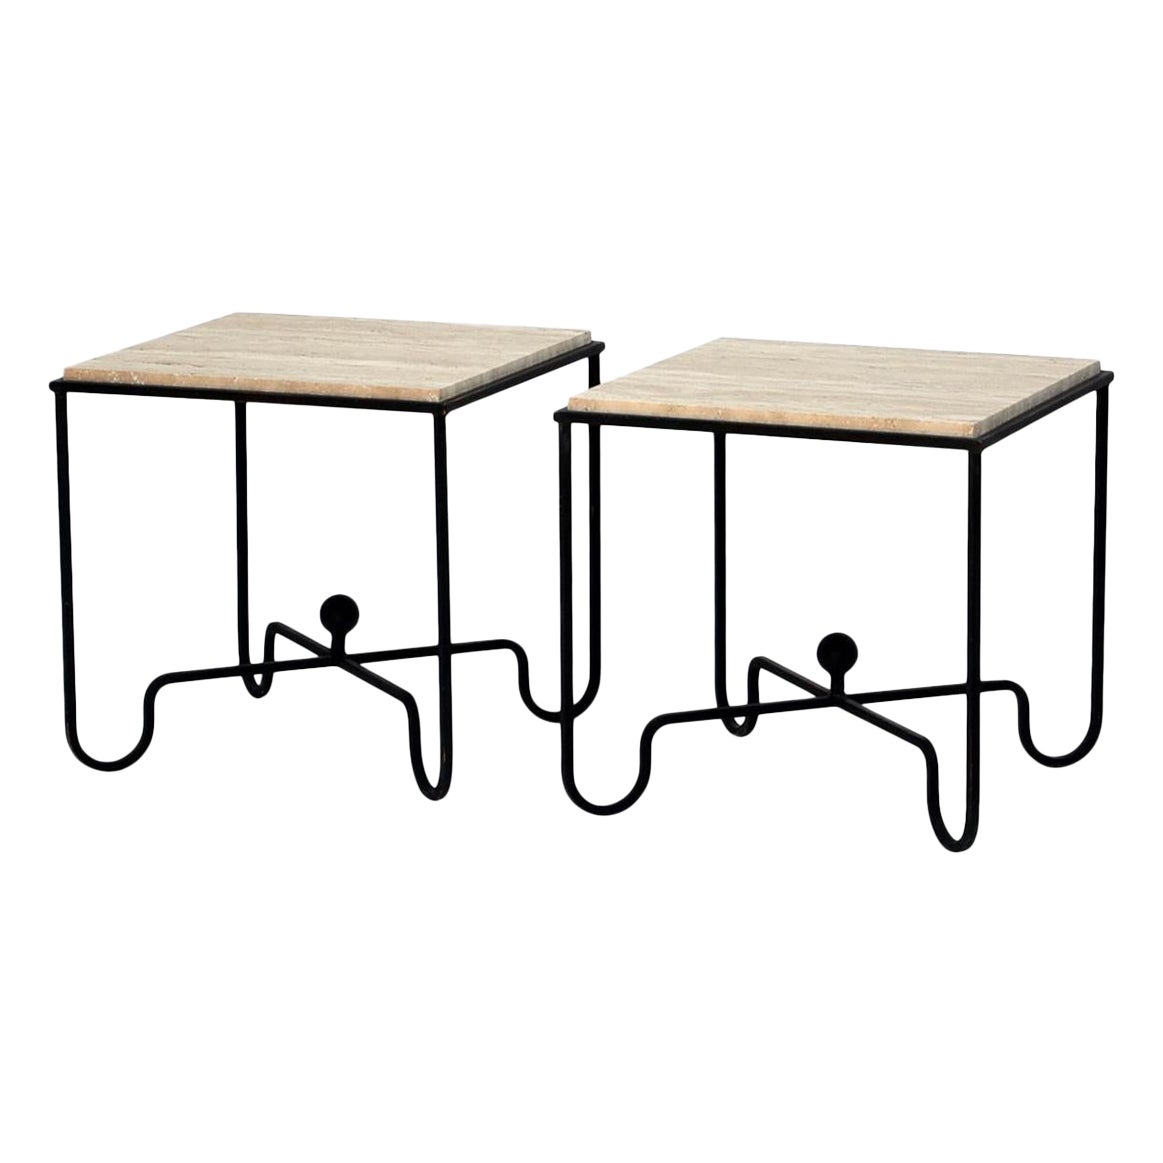 Pair of Wrought Iron and Travertine 'Entretoise' Side Tables by Design Frères